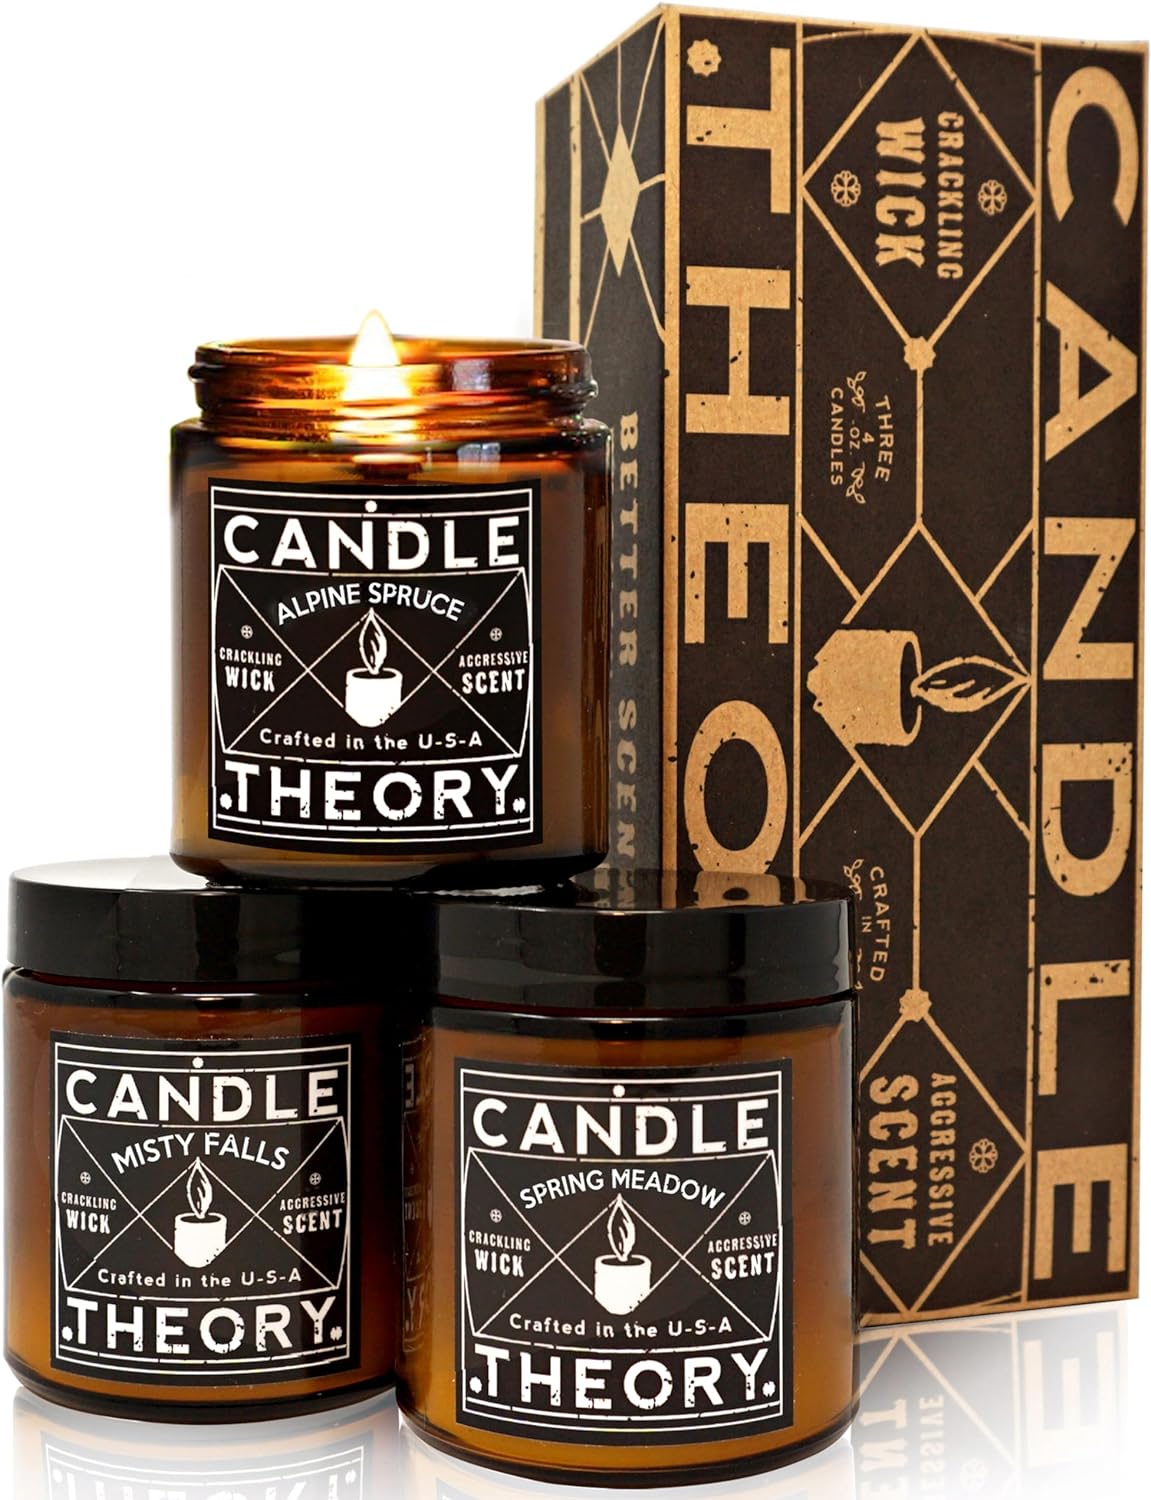 Scented Candle Gift Set with Crackling Wood Wicks 3, 4oz Candles, Misty Falls, Alpine Spruce, Spring Meadow - Designed for Both Men Women, Man Cave Decor Wood Wicks Candle Wood Wick Candles for Home